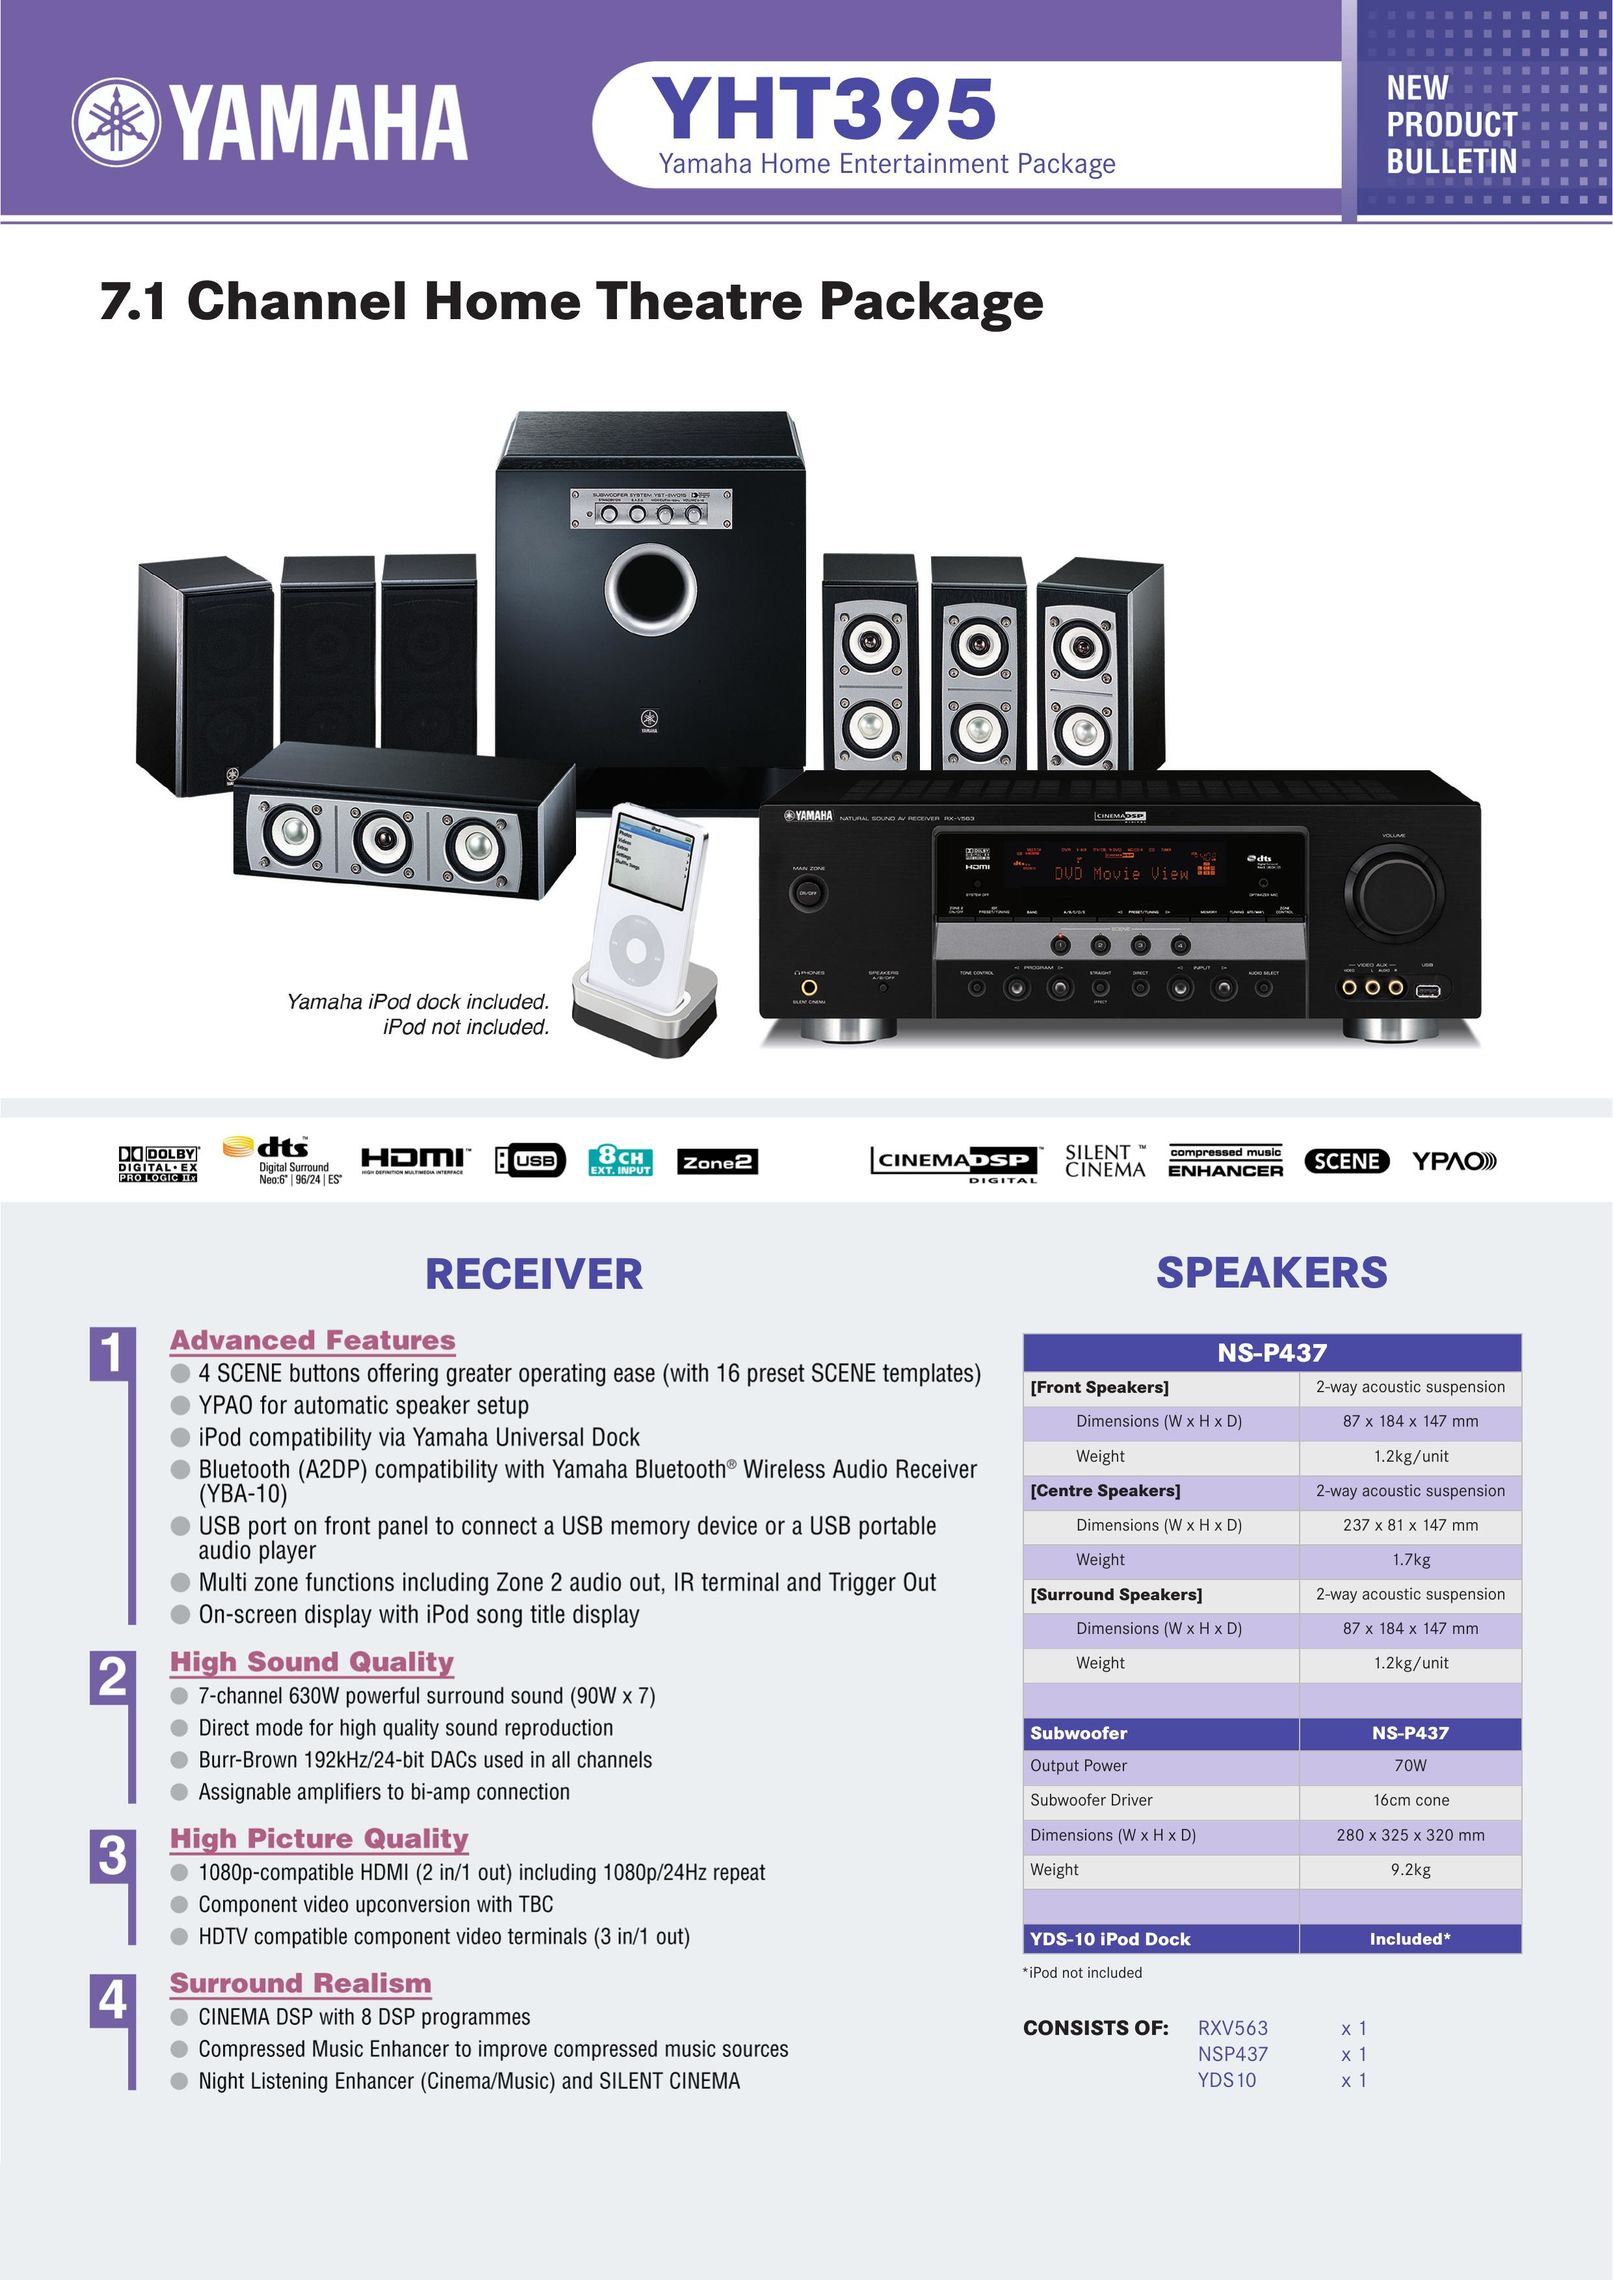 Yamaha YHT395 Home Theater System User Manual